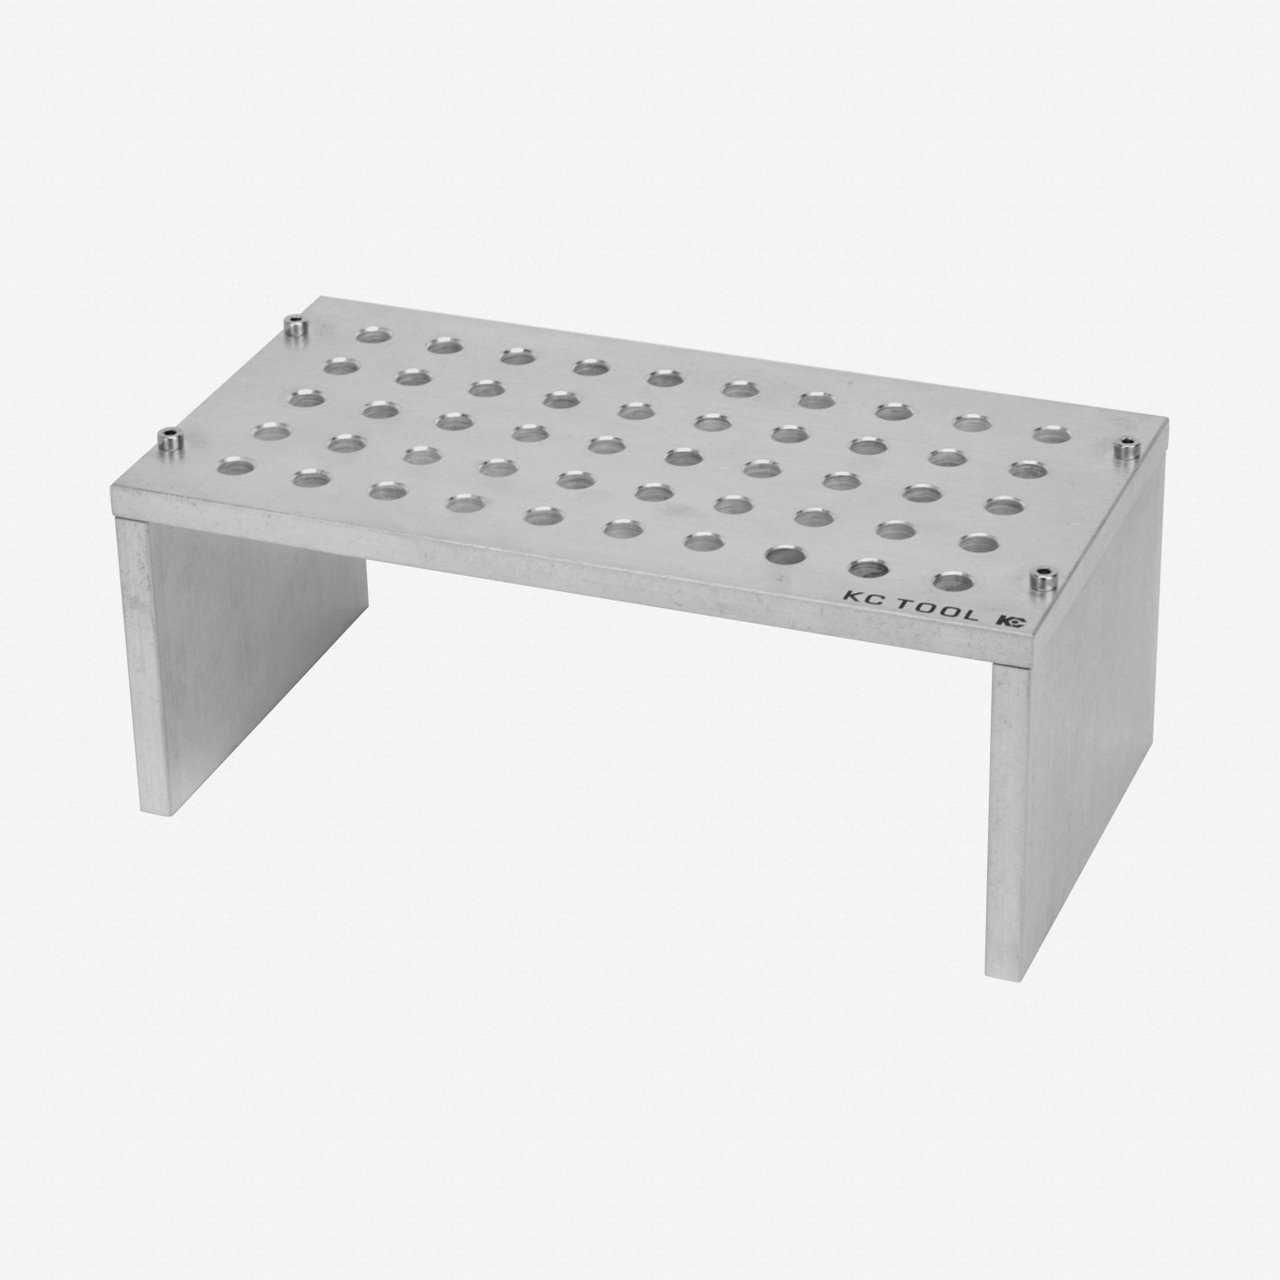 KC Tool Aluminum Bench Top Stand for Precision Tools - 50 Holes, Tumbled Finish